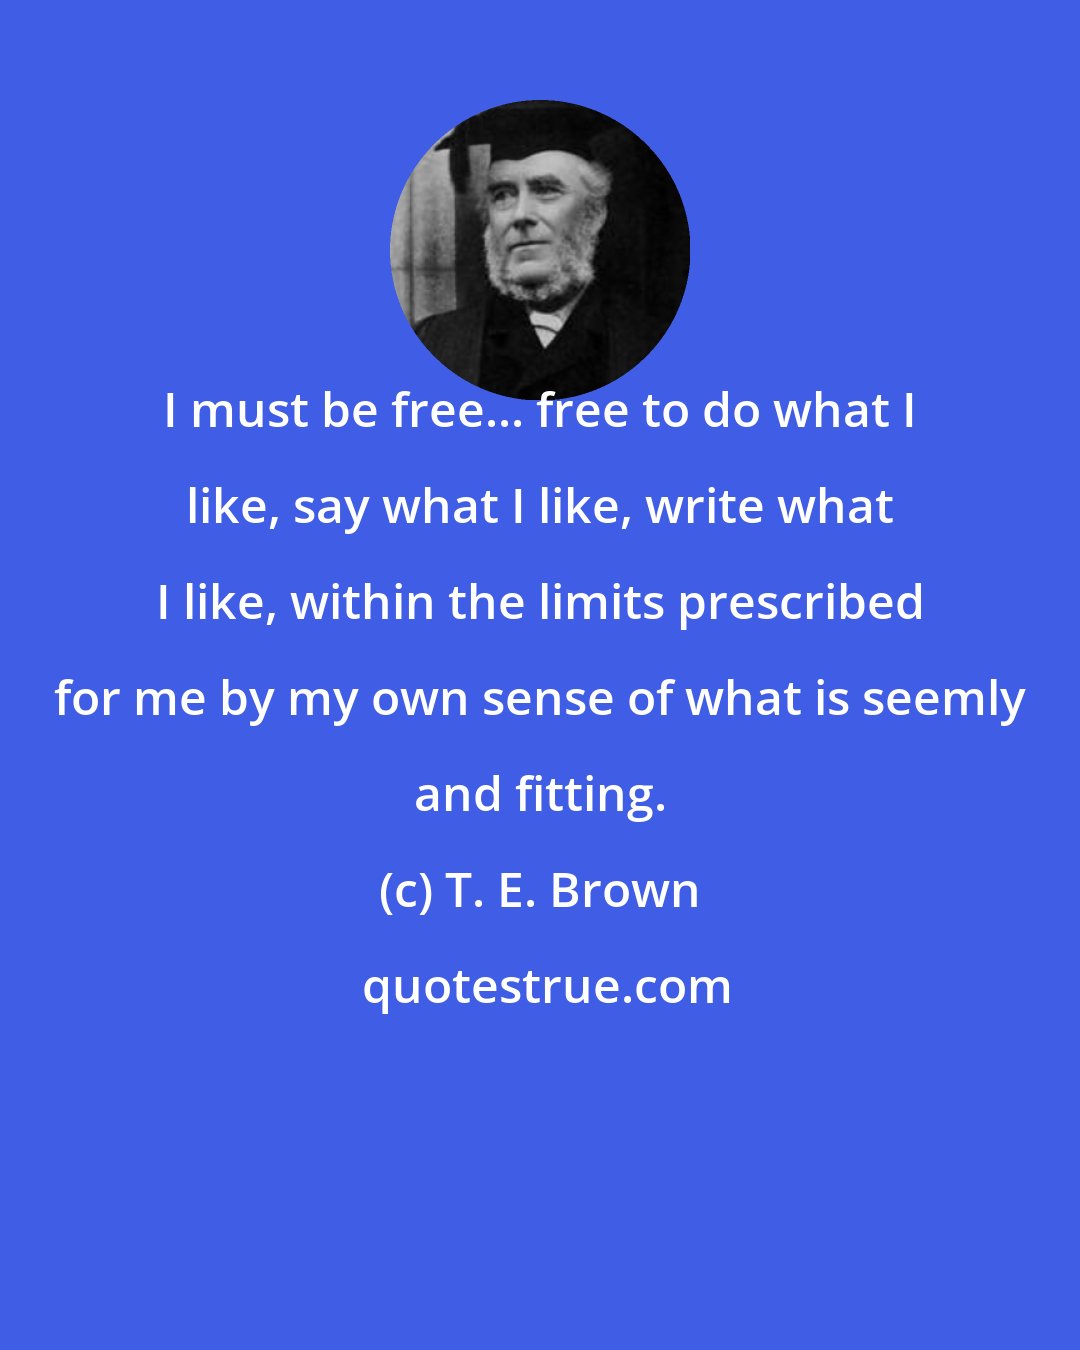 T. E. Brown: I must be free... free to do what I like, say what I like, write what I like, within the limits prescribed for me by my own sense of what is seemly and fitting.